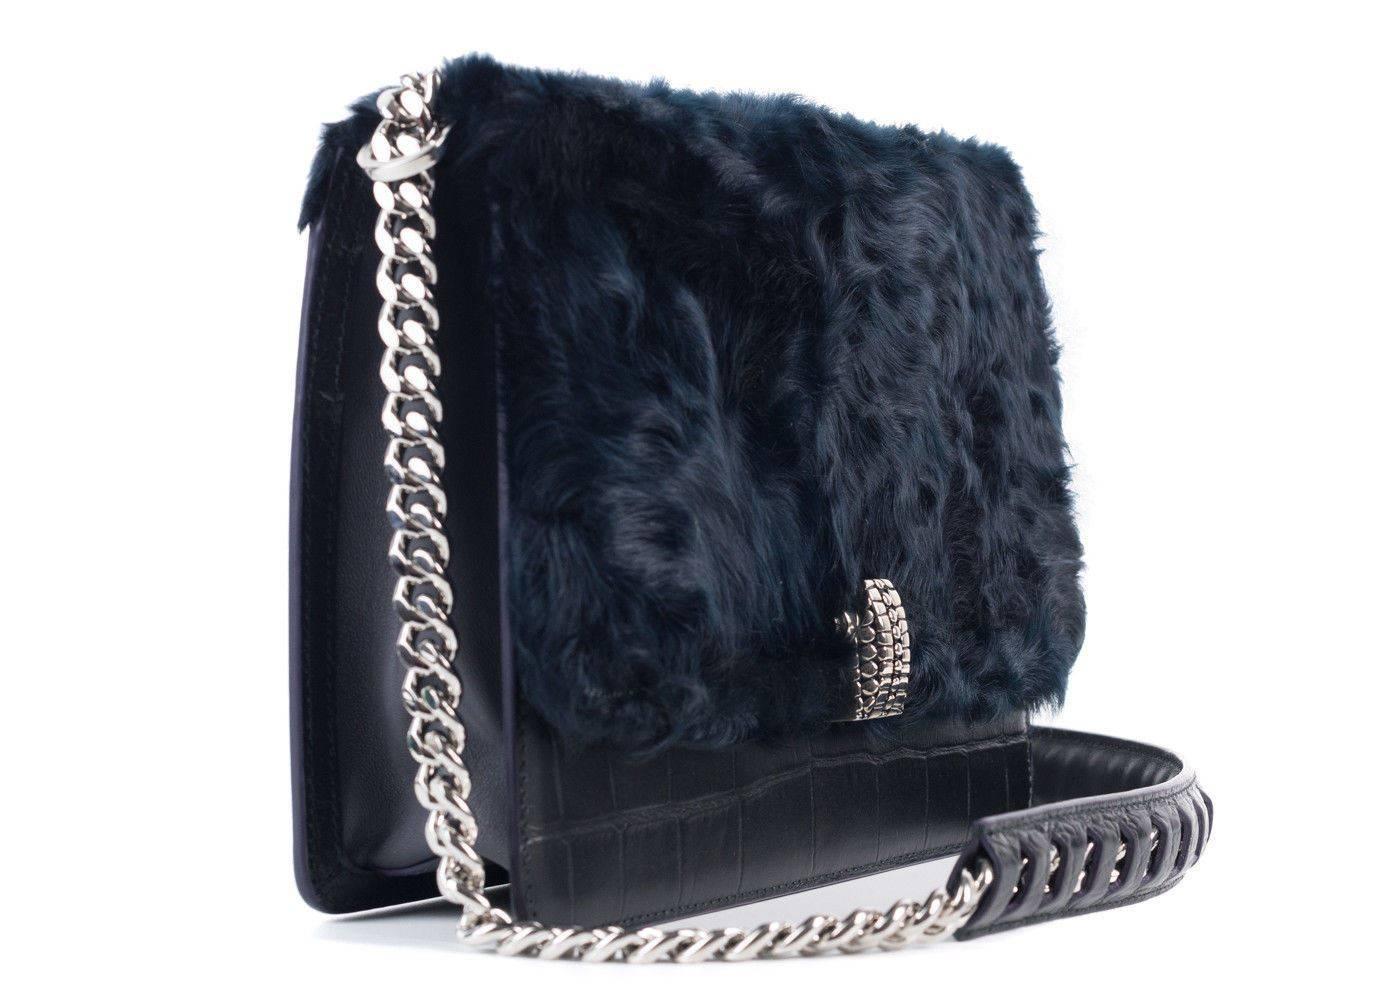 Roberto Cavalli Black Leather Navy Tousled Fur Chained Shoulder Bag In New Condition For Sale In Brooklyn, NY